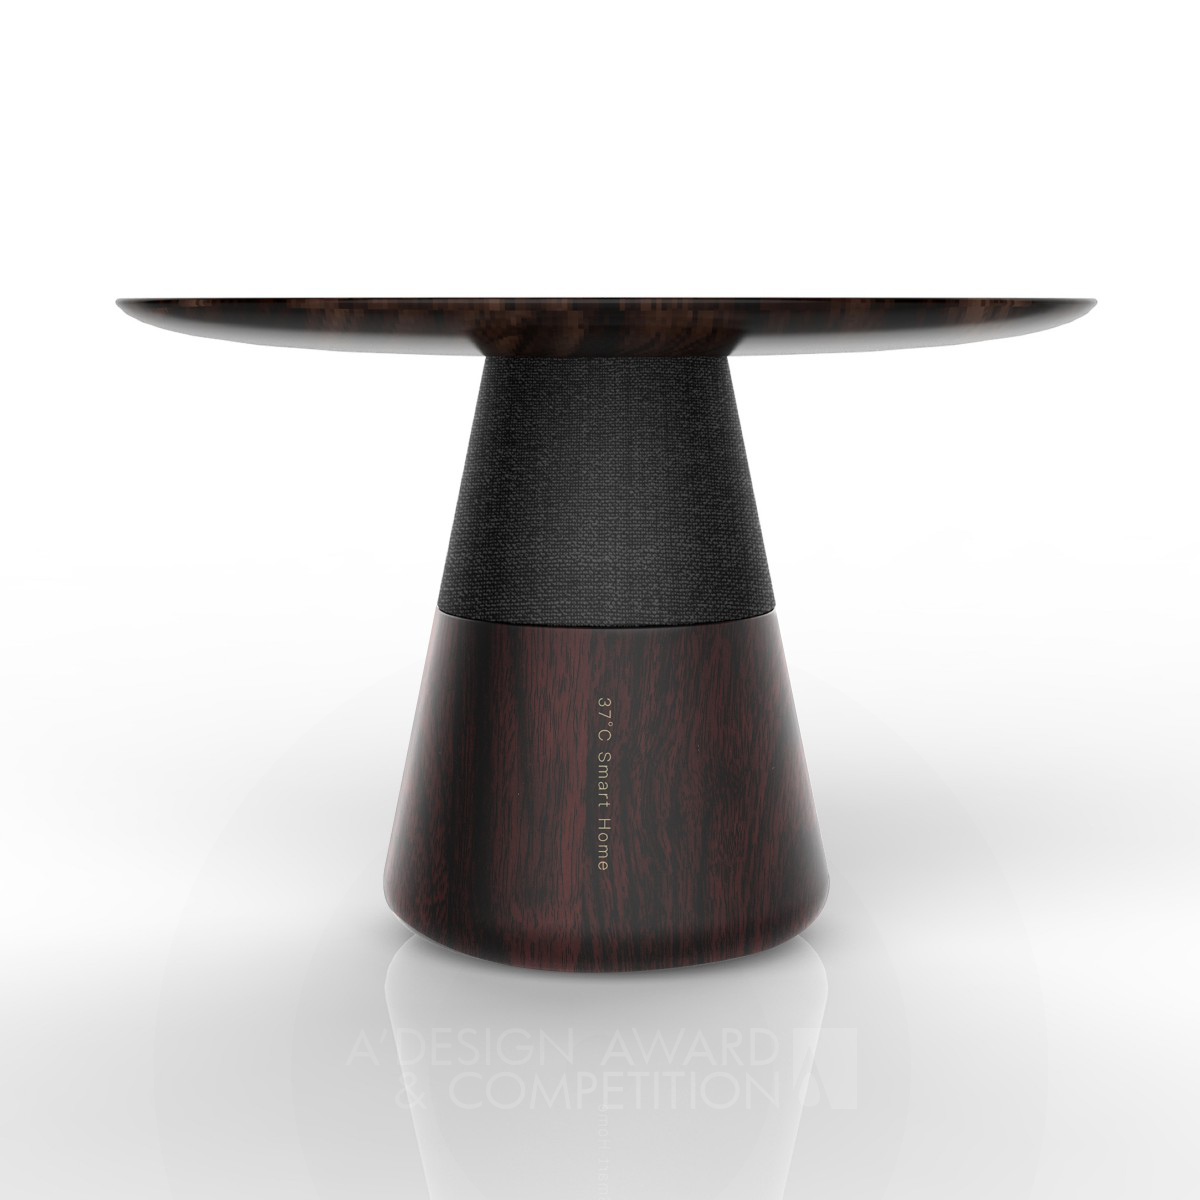 37 Degrees Coffee Table by 37 Degree Smart Home Guangzhou 37 Degree Smart Home Ltd.